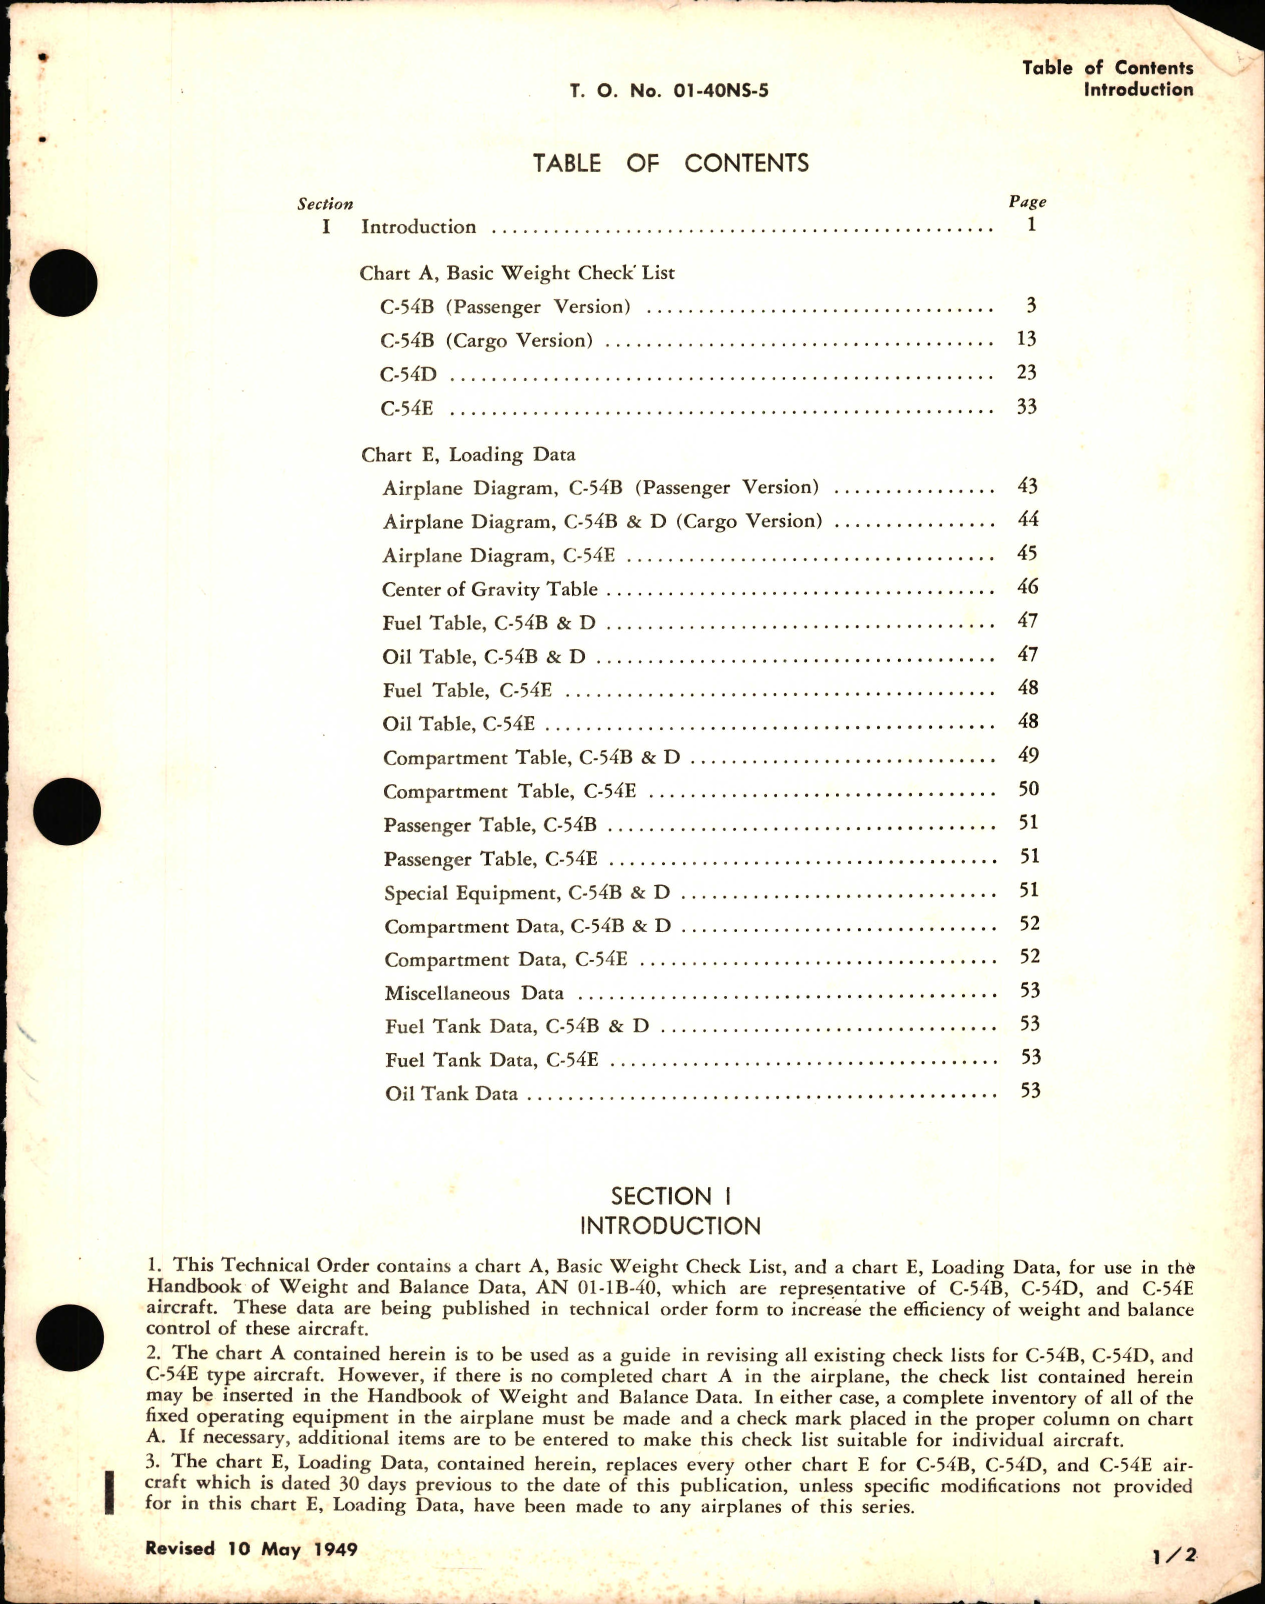 Sample page 3 from AirCorps Library document: Basic Weight Check List and Loading Data for C54B, C-54D, and C-54E